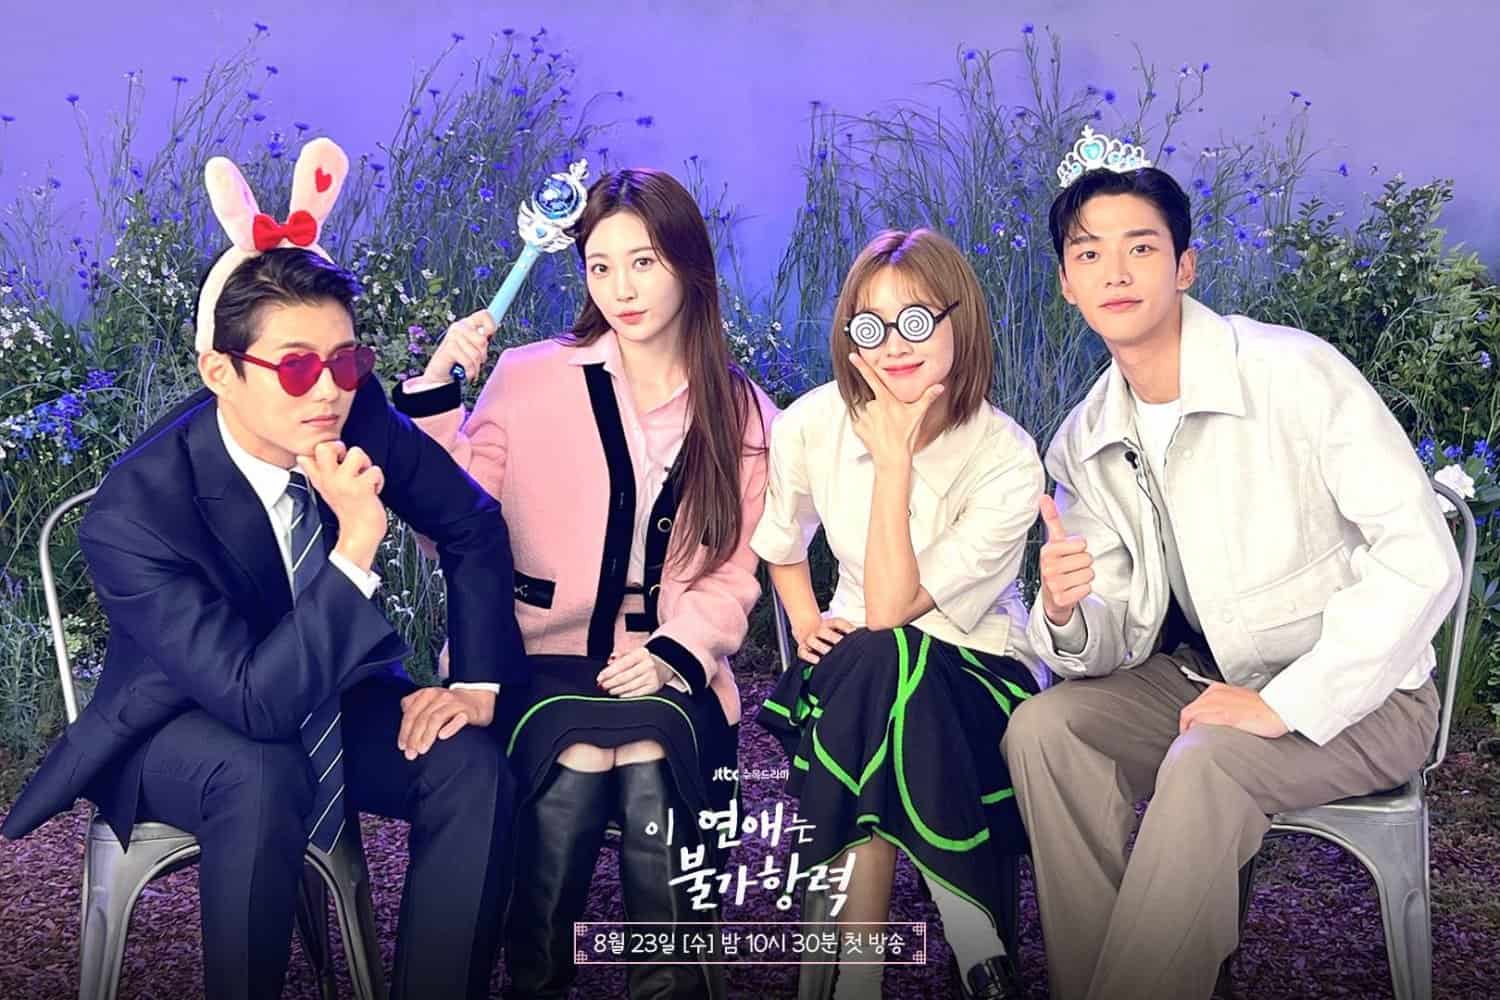 Destined With You Episode 3: Release Date, Preview and Streaming Guide